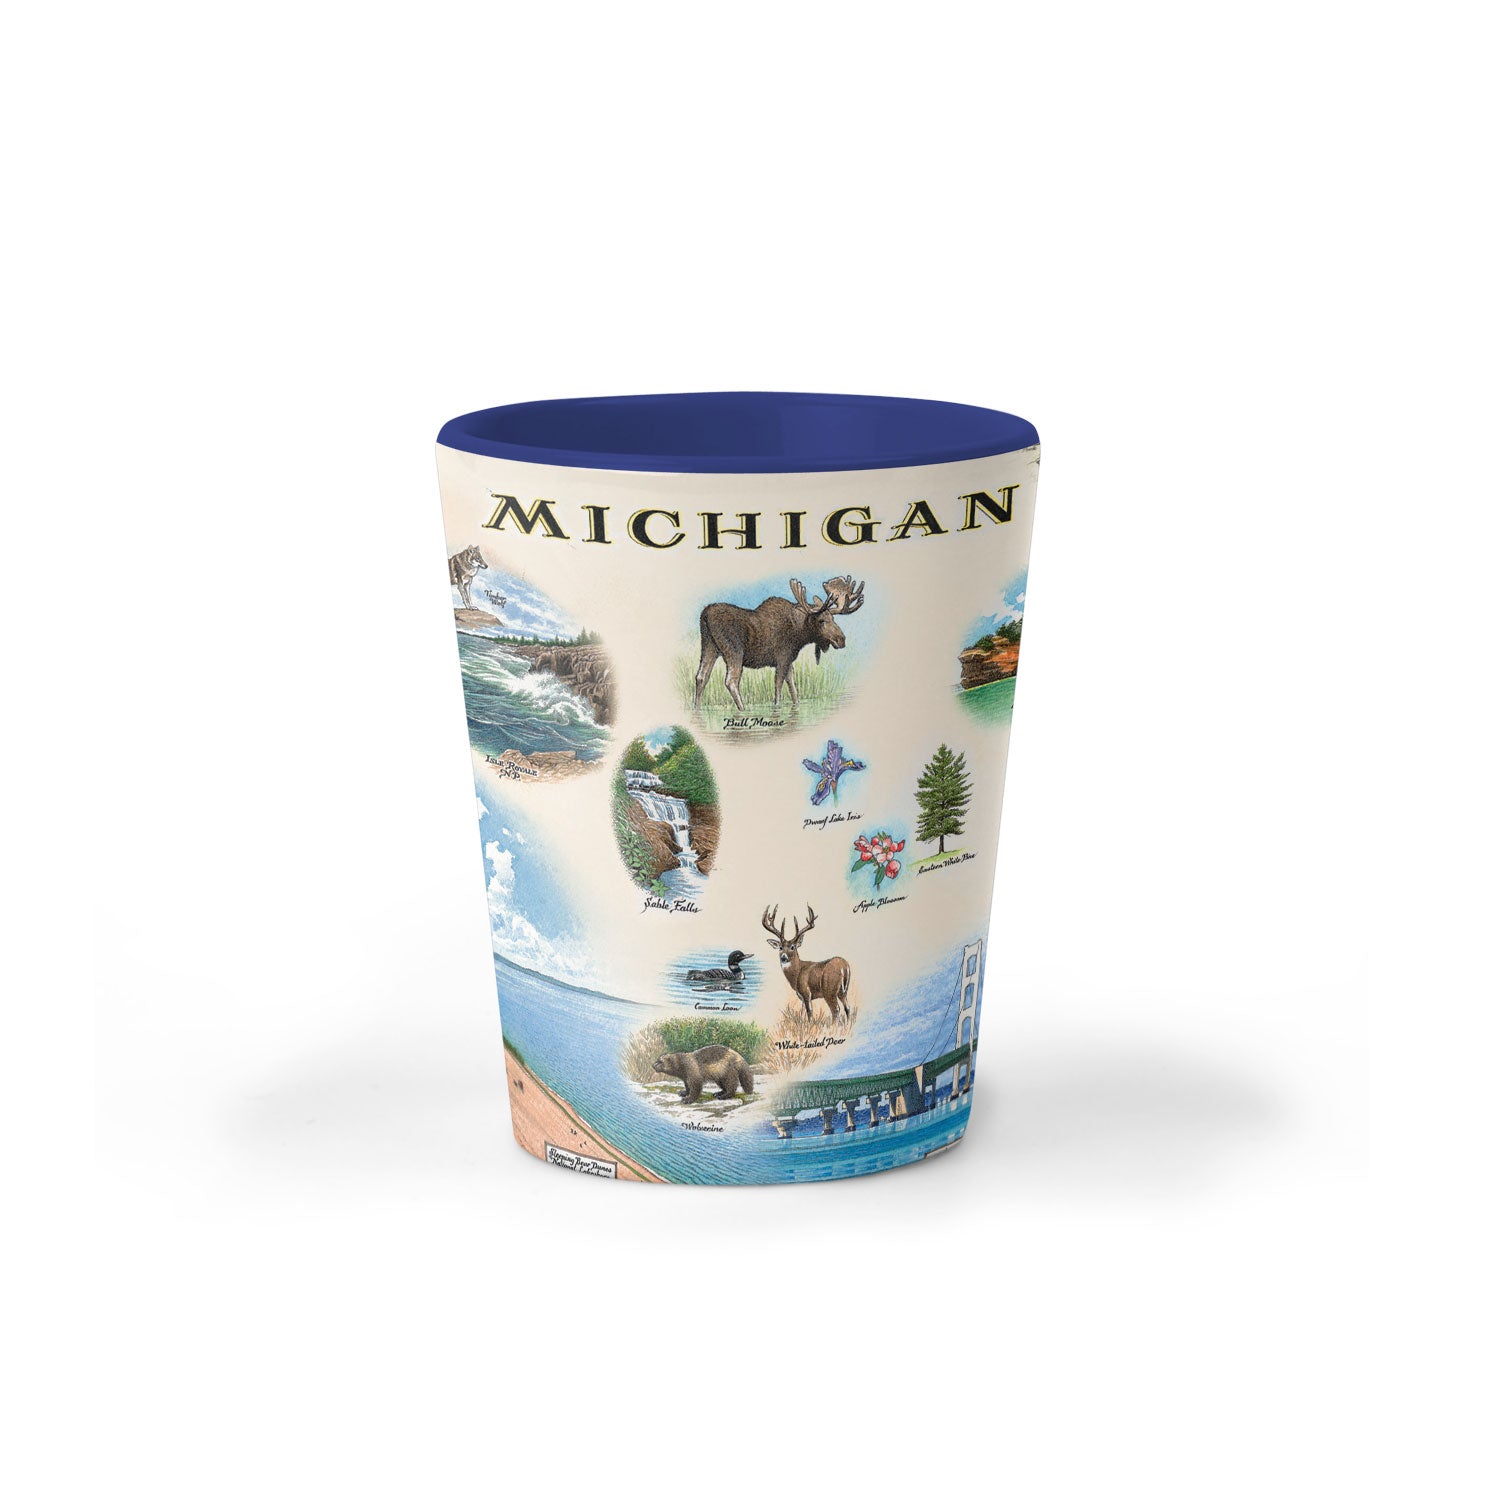 Michigan State Map Ceramic shot glass by Xplorer Maps. Featuring the Great Lakes, Detroit, Ann Arbor, Grand Rapids, and Lansing. The Print also features Nature, animals, ducks, deer, fish, moose lighthouses, wolverines, and the Mackinac Bridge.